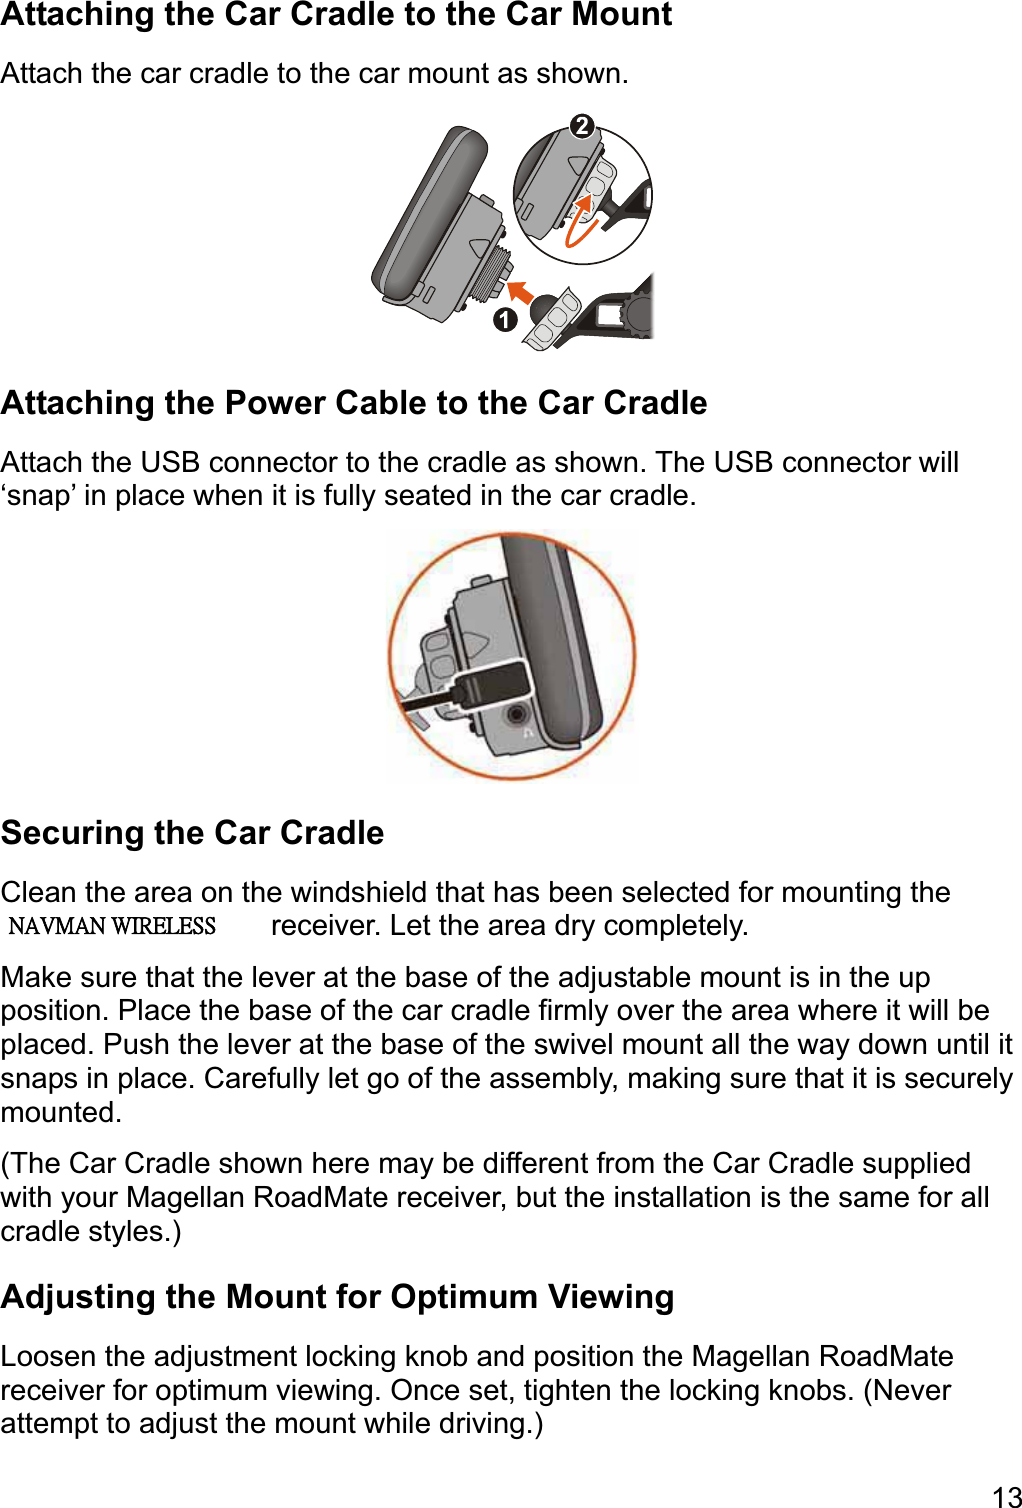 13Attaching the Car Cradle to the Car Mount Attach the car cradle to the car mount as shown. Attaching the Power Cable to the Car Cradle Attach the USB connector to the cradle as shown. The USB connector will ‘snap’ in place when it is fully seated in the car cradle. Securing the Car Cradle Clean the area on the windshield that has been selected for mounting the Magellan RoadMate receiver. Let the area dry completely. Make sure that the lever at the base of the adjustable mount is in the up position. Place the base of the car cradle firmly over the area where it will be placed. Push the lever at the base of the swivel mount all the way down until it snaps in place. Carefully let go of the assembly, making sure that it is securely mounted.(The Car Cradle shown here may be different from the Car Cradle supplied with your Magellan RoadMate receiver, but the installation is the same for all cradle styles.) Adjusting the Mount for Optimum Viewing Loosen the adjustment locking knob and position the Magellan RoadMate receiver for optimum viewing. Once set, tighten the locking knobs. (Never attempt to adjust the mount while driving.) ʳʳʳˡ˔˩ˠ˔ˡʳ˪˜˥˘˟˘˦˦